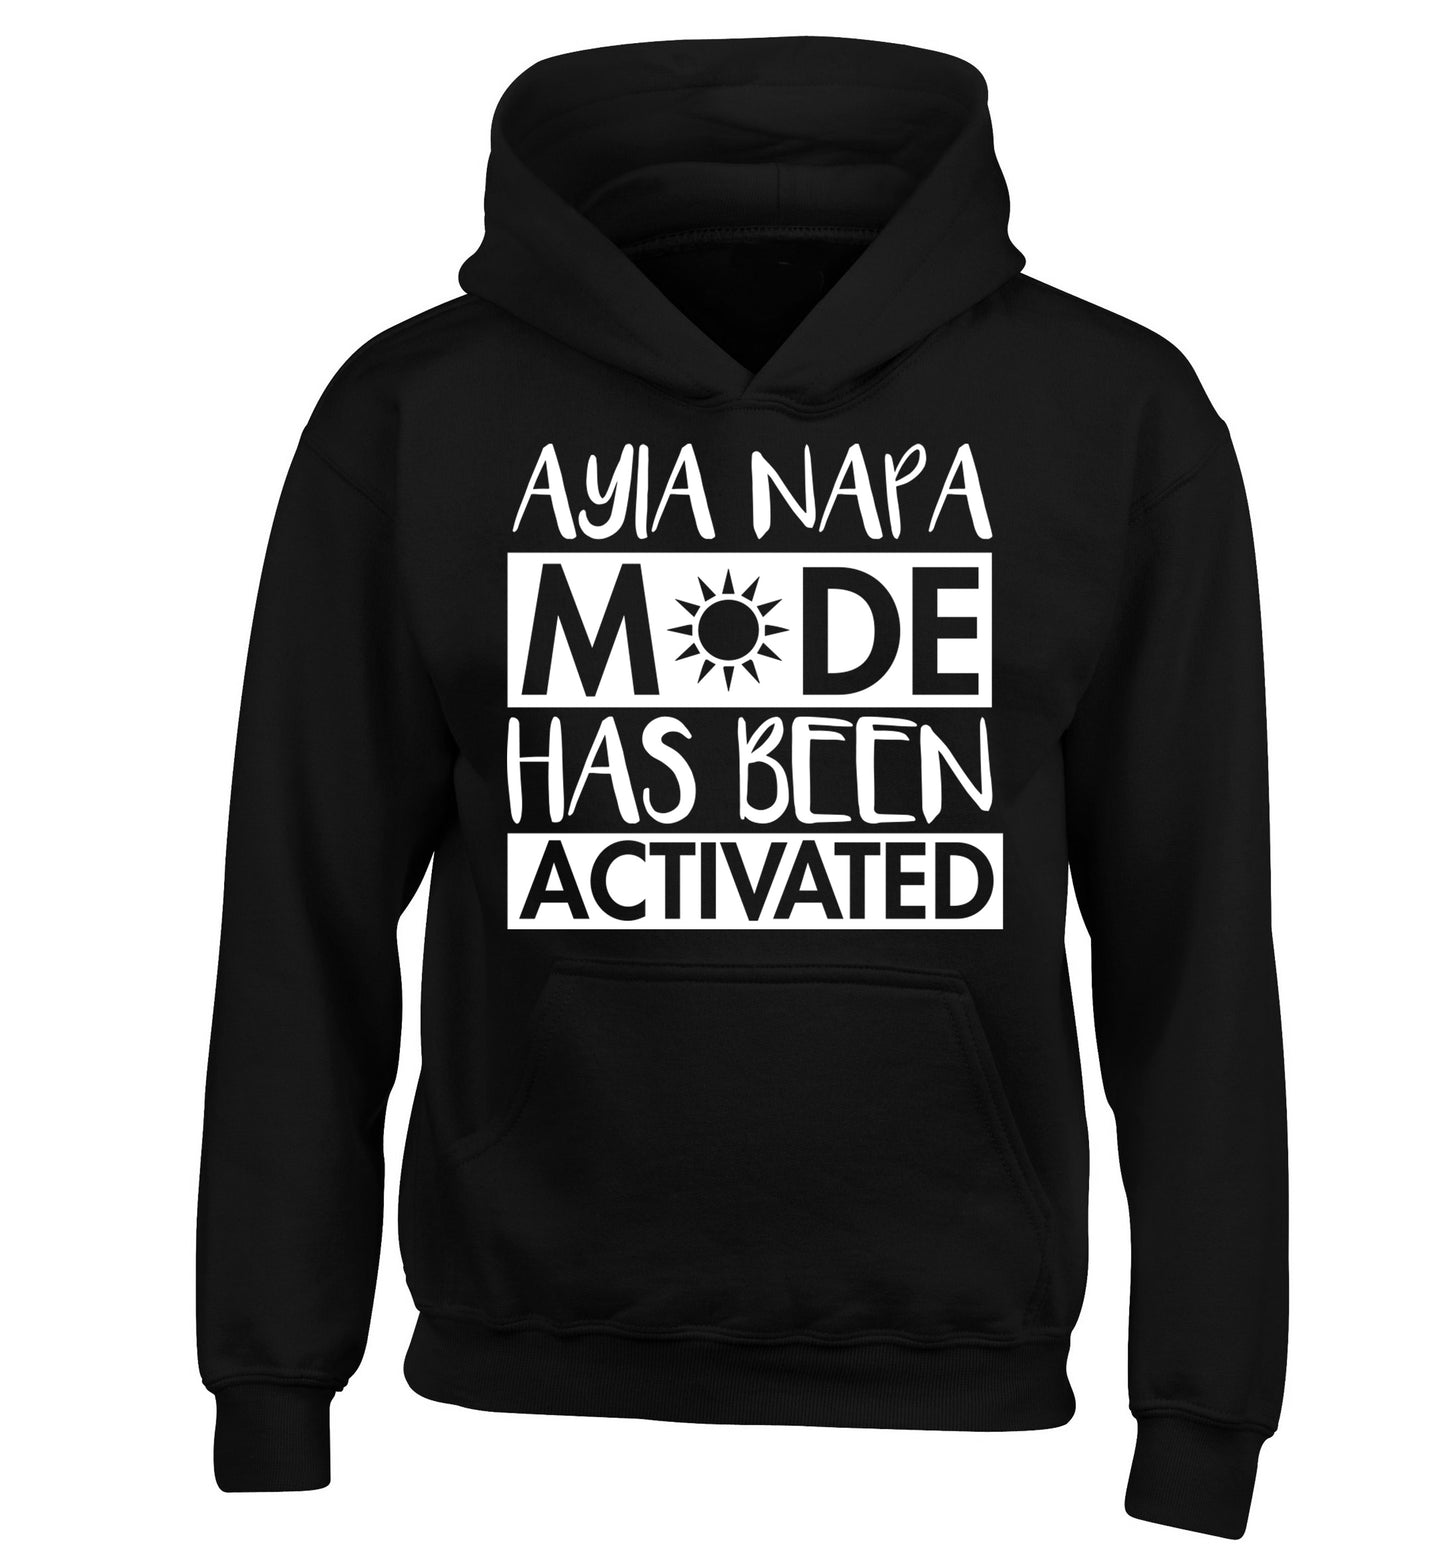 Ayia Napa mode has been activated children's black hoodie 12-13 Years